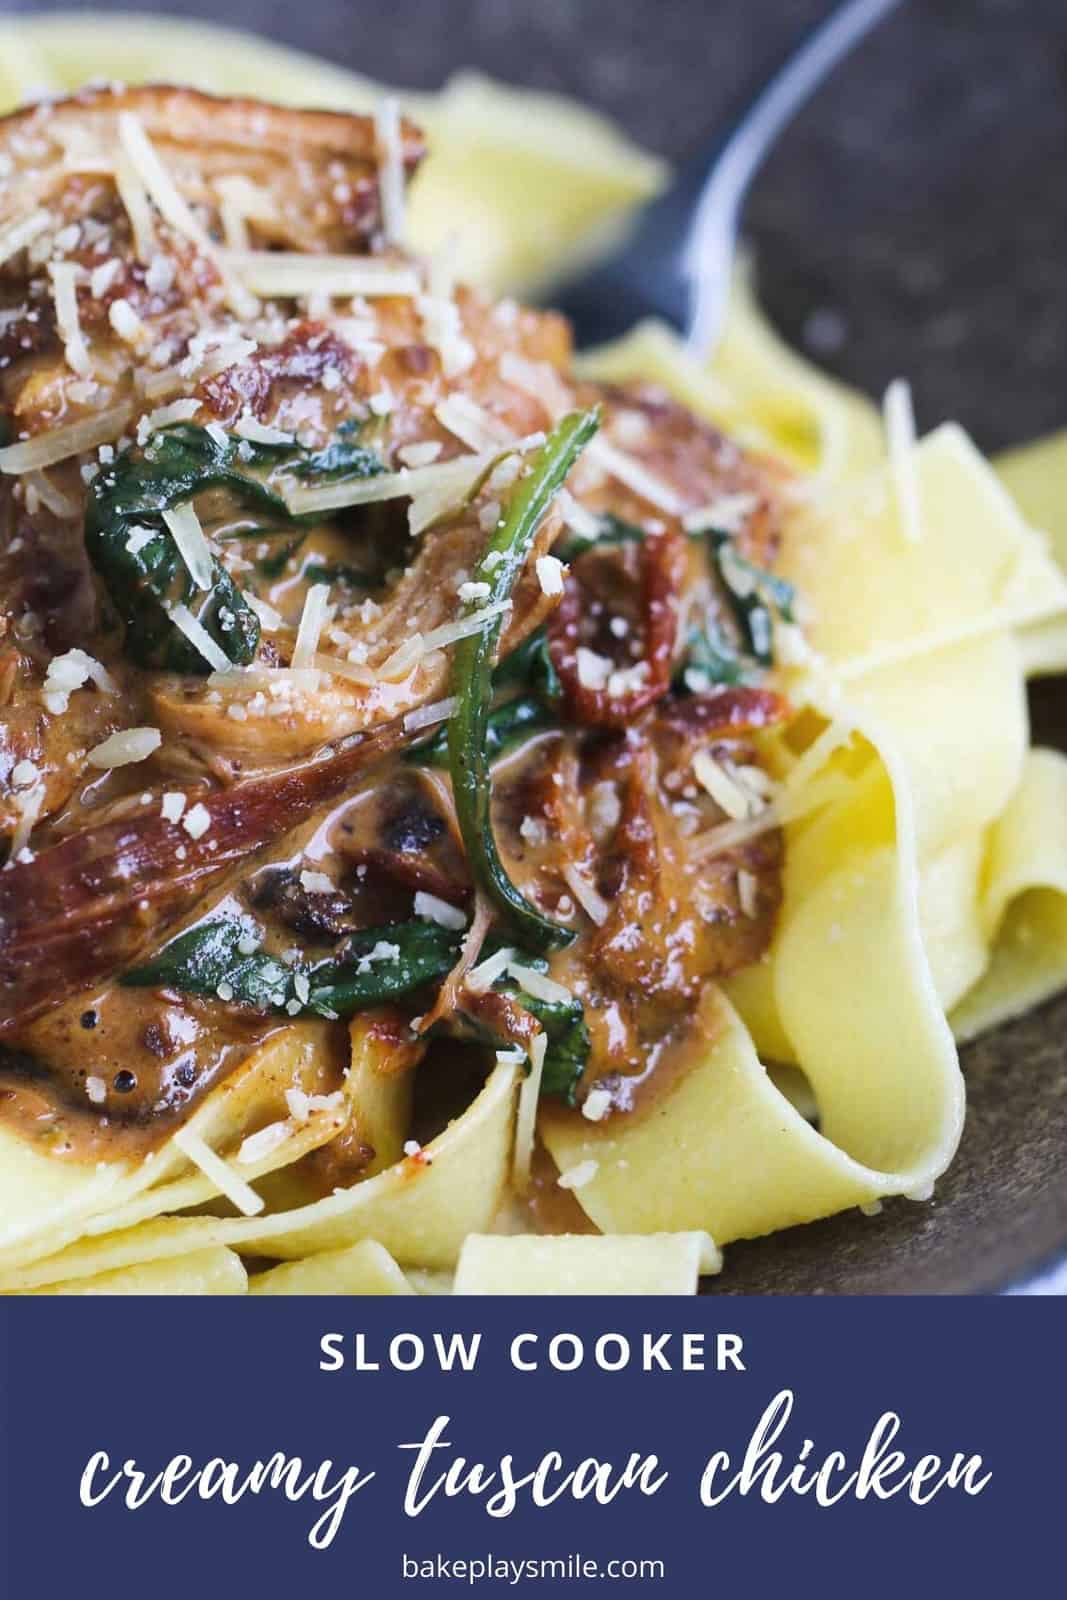 Creamy Tuscan Slow Cooker Chicken with sun-dried tomatoes, baby spinach and parmesan cheese is the ultimate winter comfort food. Serve with pasta for a simple meal the whole family will love. #creamy #tuscan #slowcooker #crockpot #chicken #dinner #family #recipe #meal 